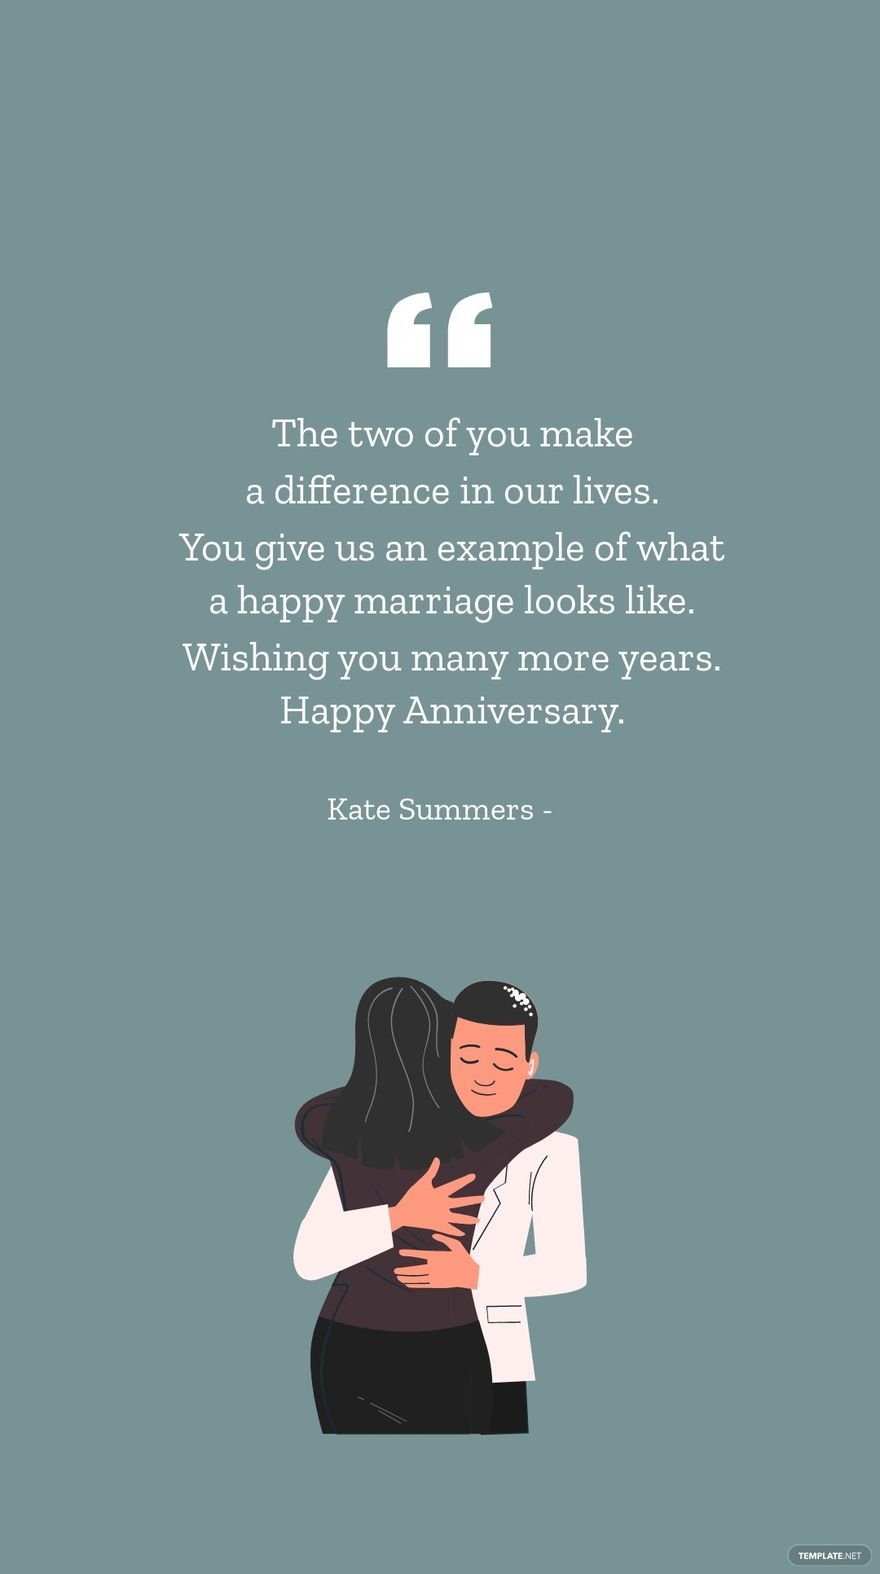 Free Kate Summers - The two of you make a difference in our lives. You give us an example of what a happy marriage looks like. Wishing you many more years. Happy Anniversary. in JPG